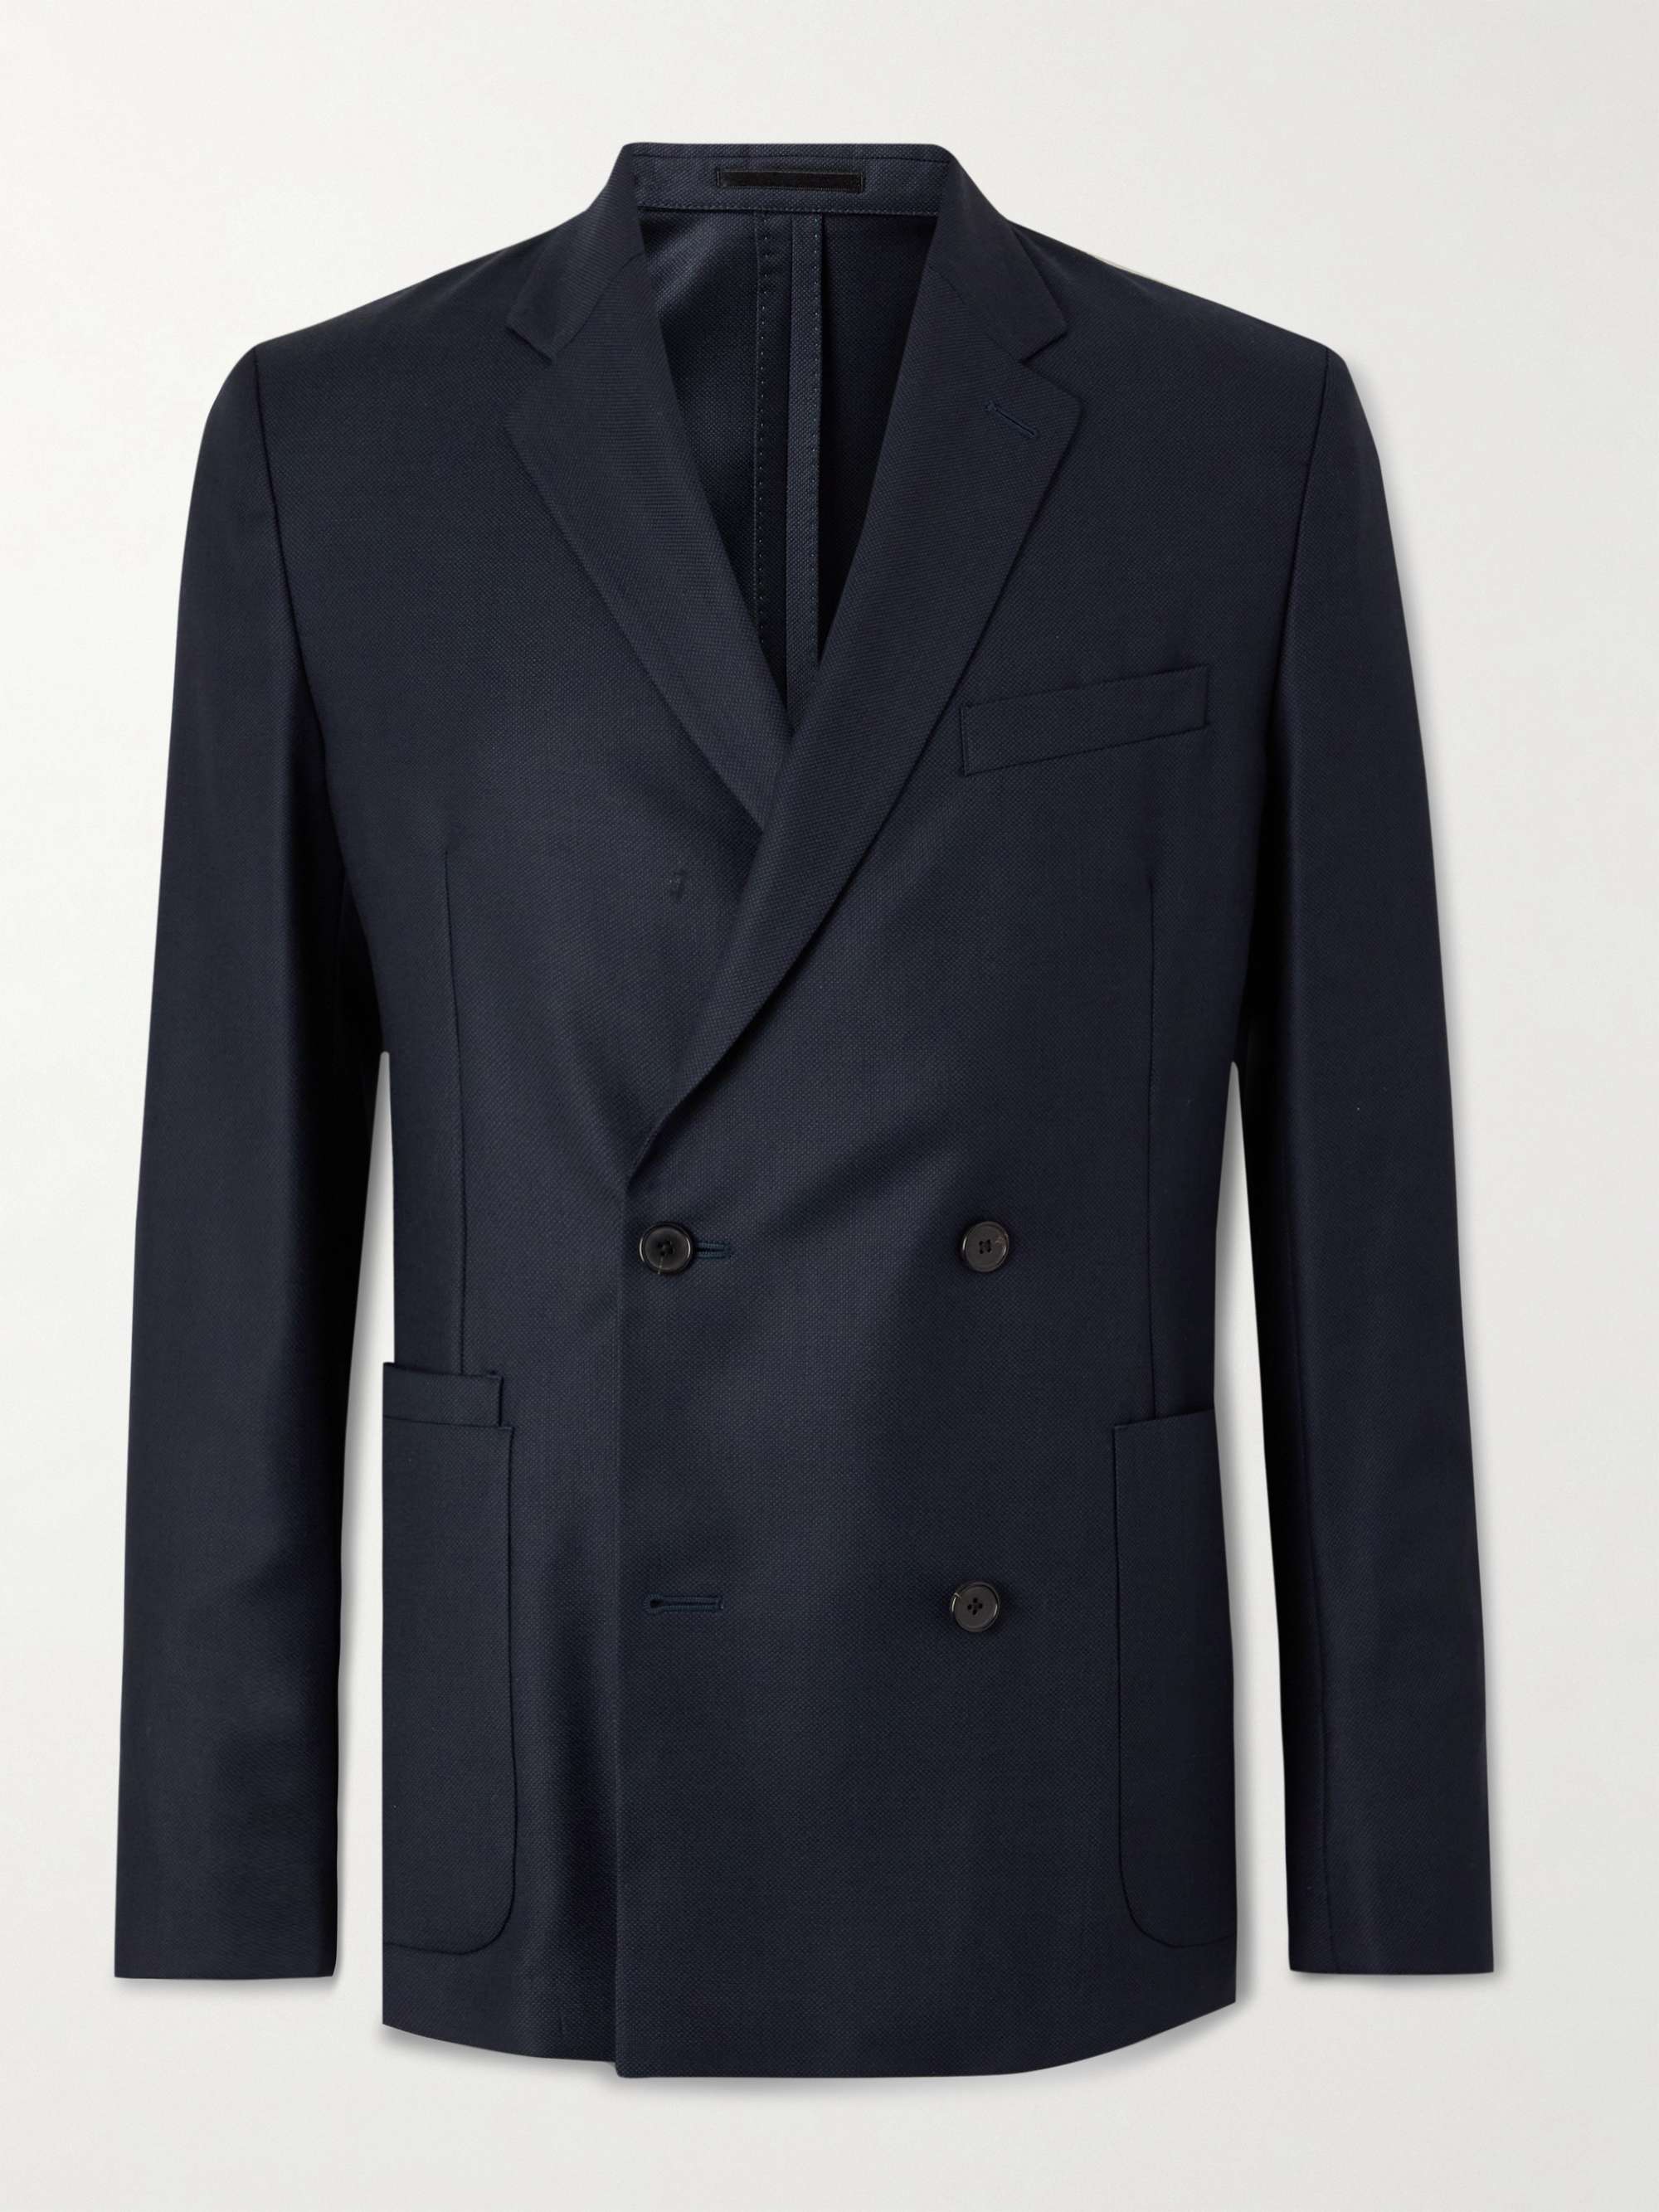 PAUL SMITH Double-Breasted Wool Blazer for Men | MR PORTER